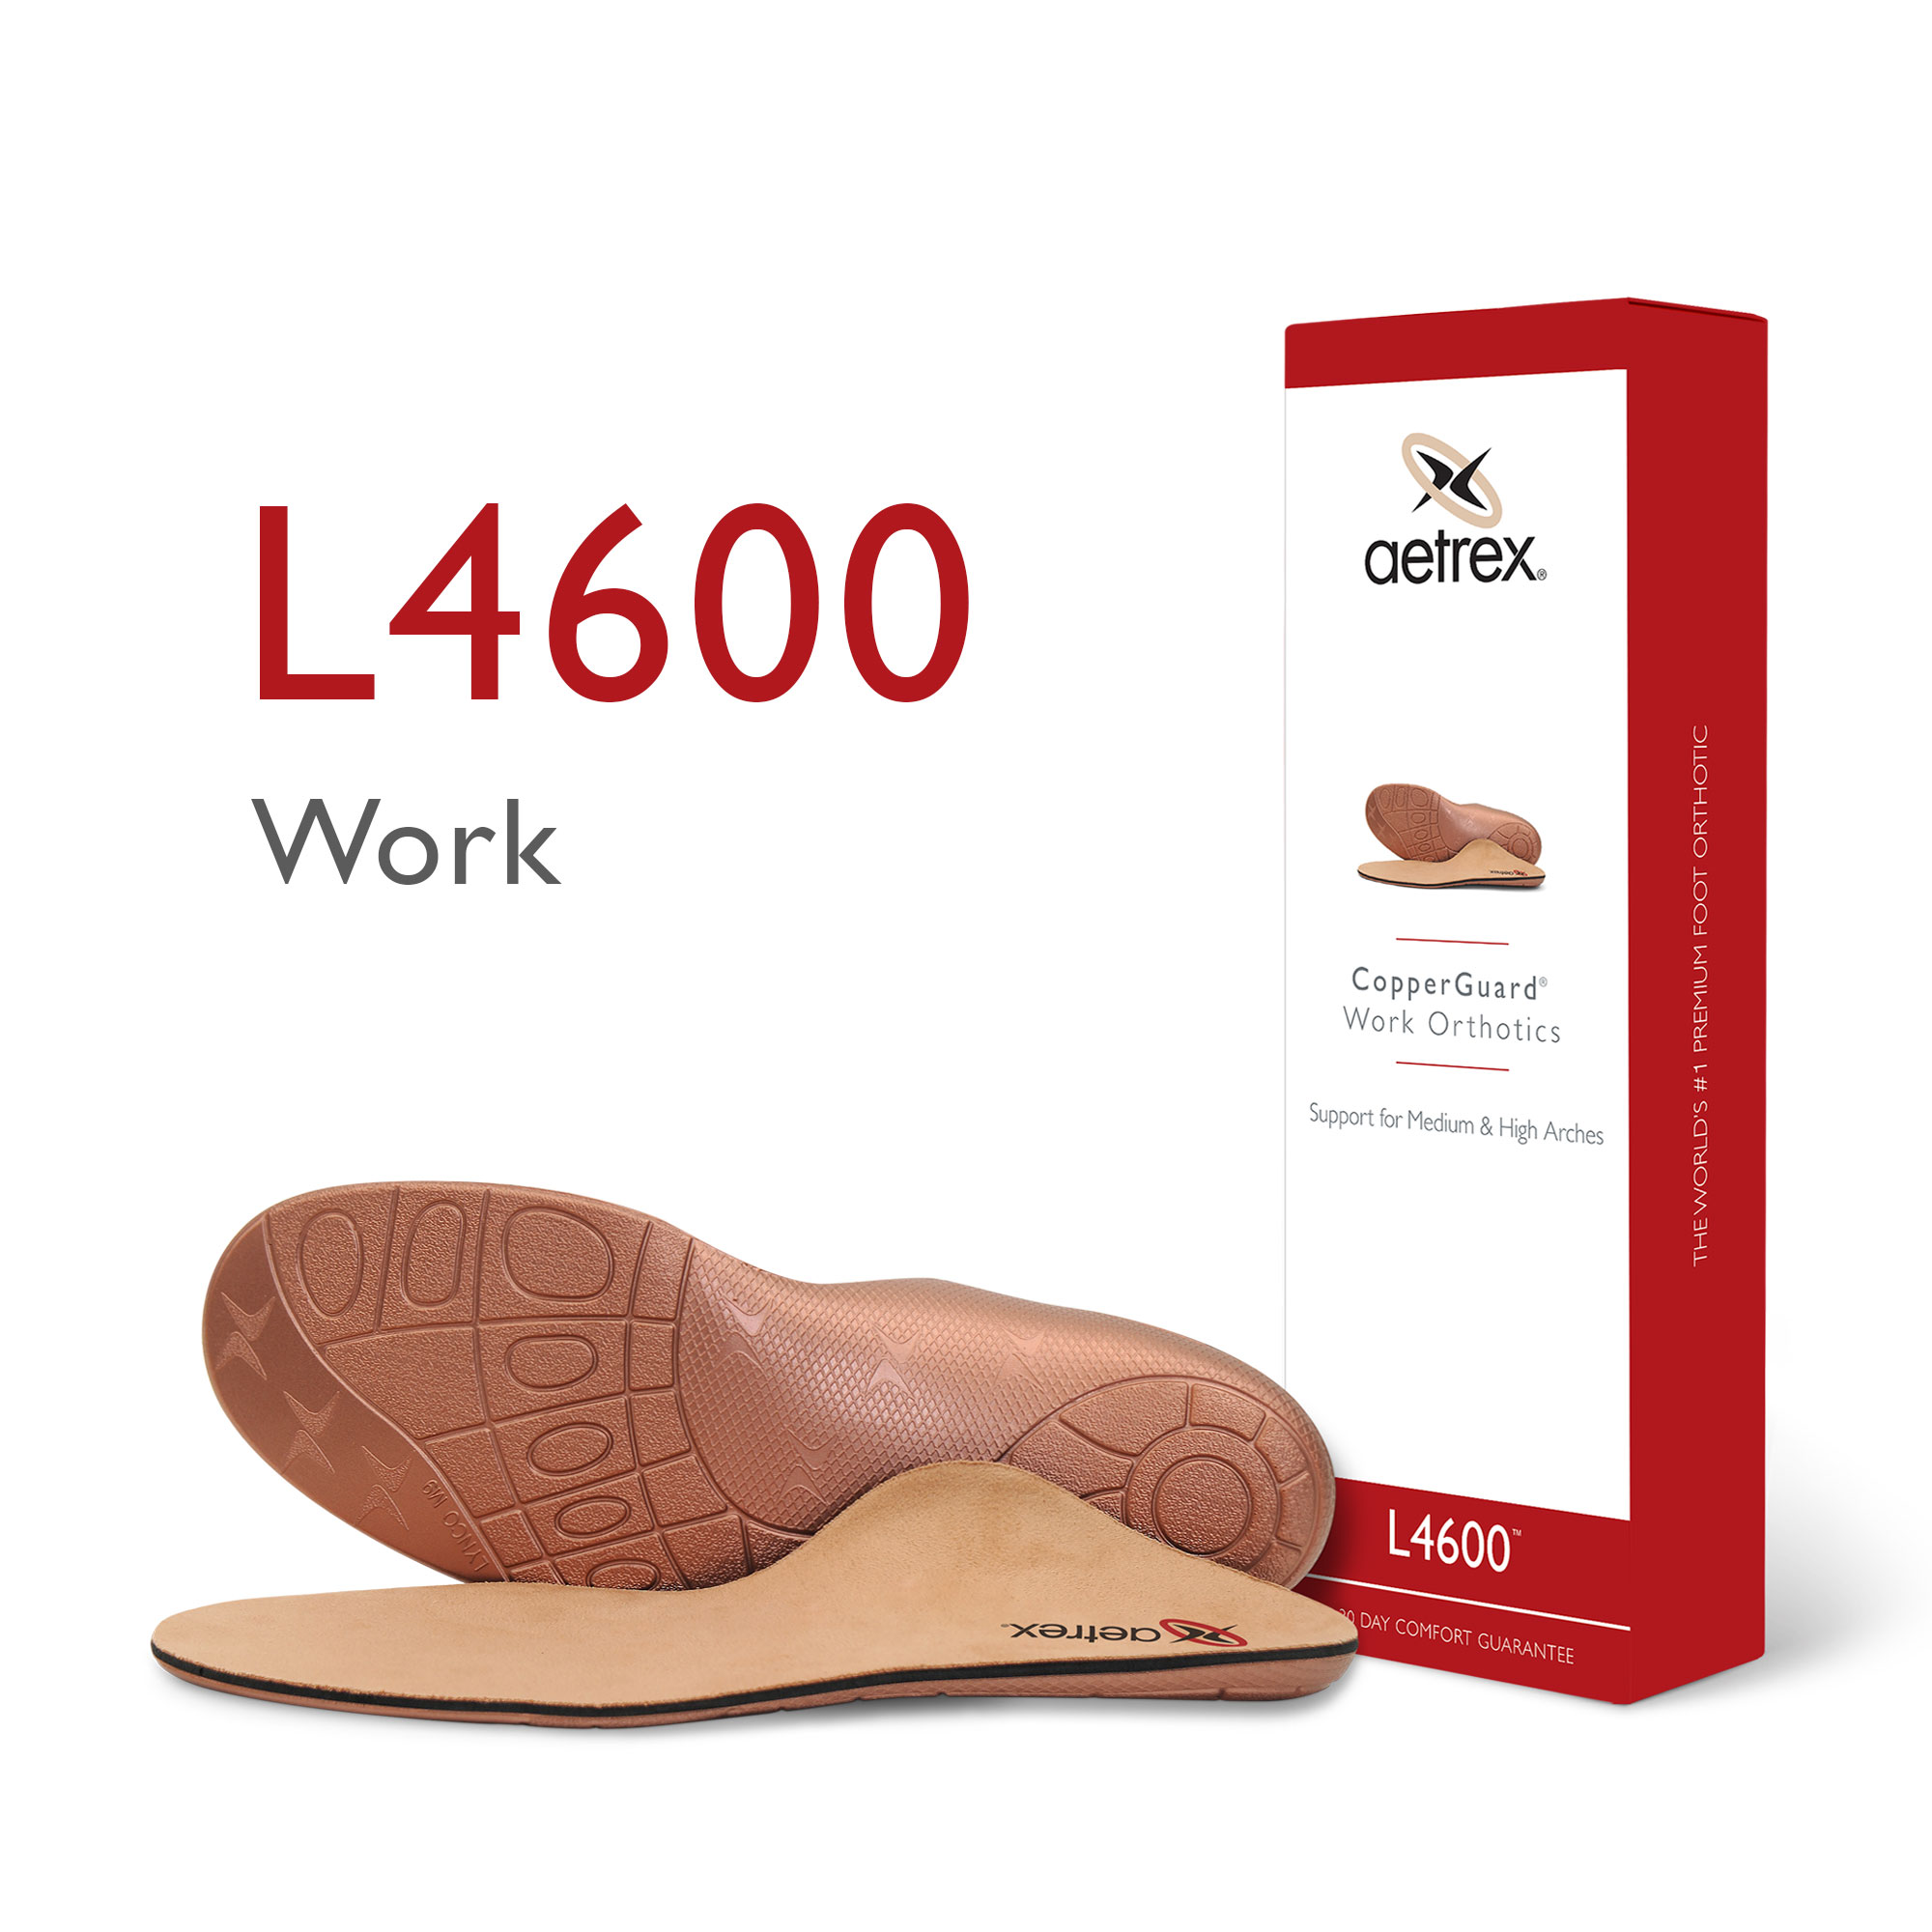 Orthotic Shoe Inserts - Buying Guide | Vionic Shoes